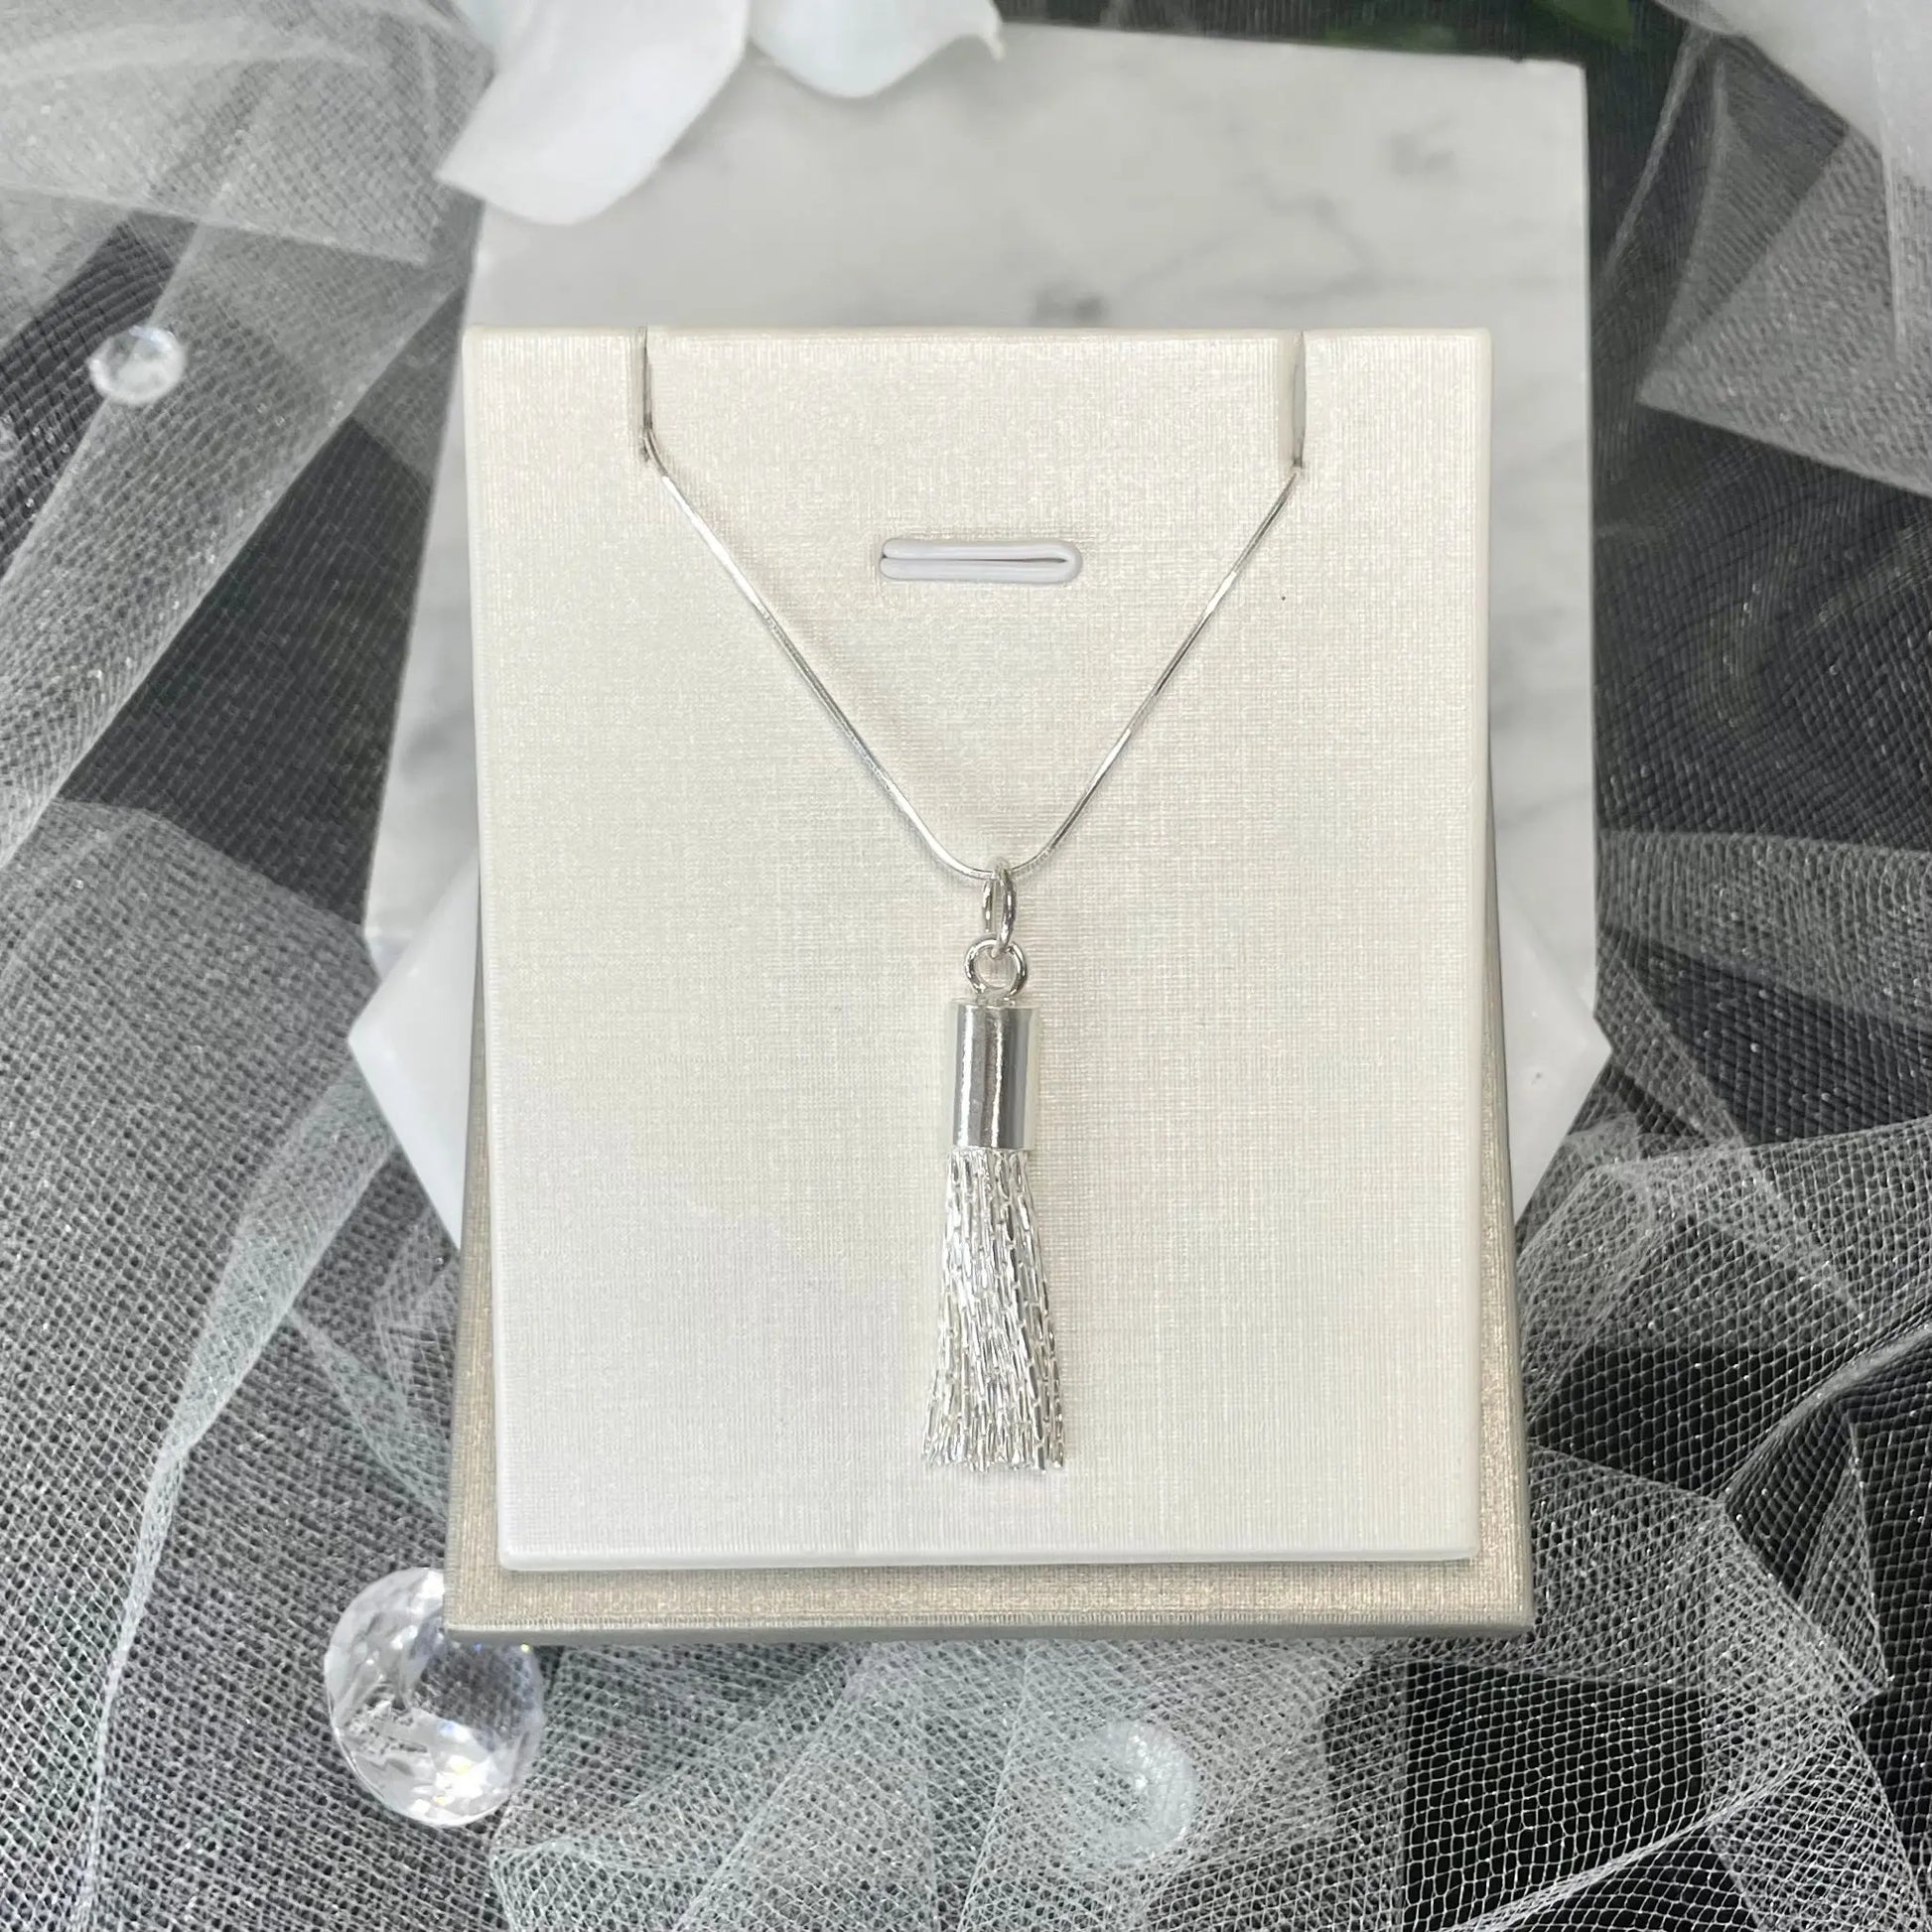 A silver necklace featuring a sleek, cylindrical pendant with fine, shimmering tassels displayed on a cream-colored jewelry card, set against a delicate backdrop of white tulle and sparkling crystal accents.